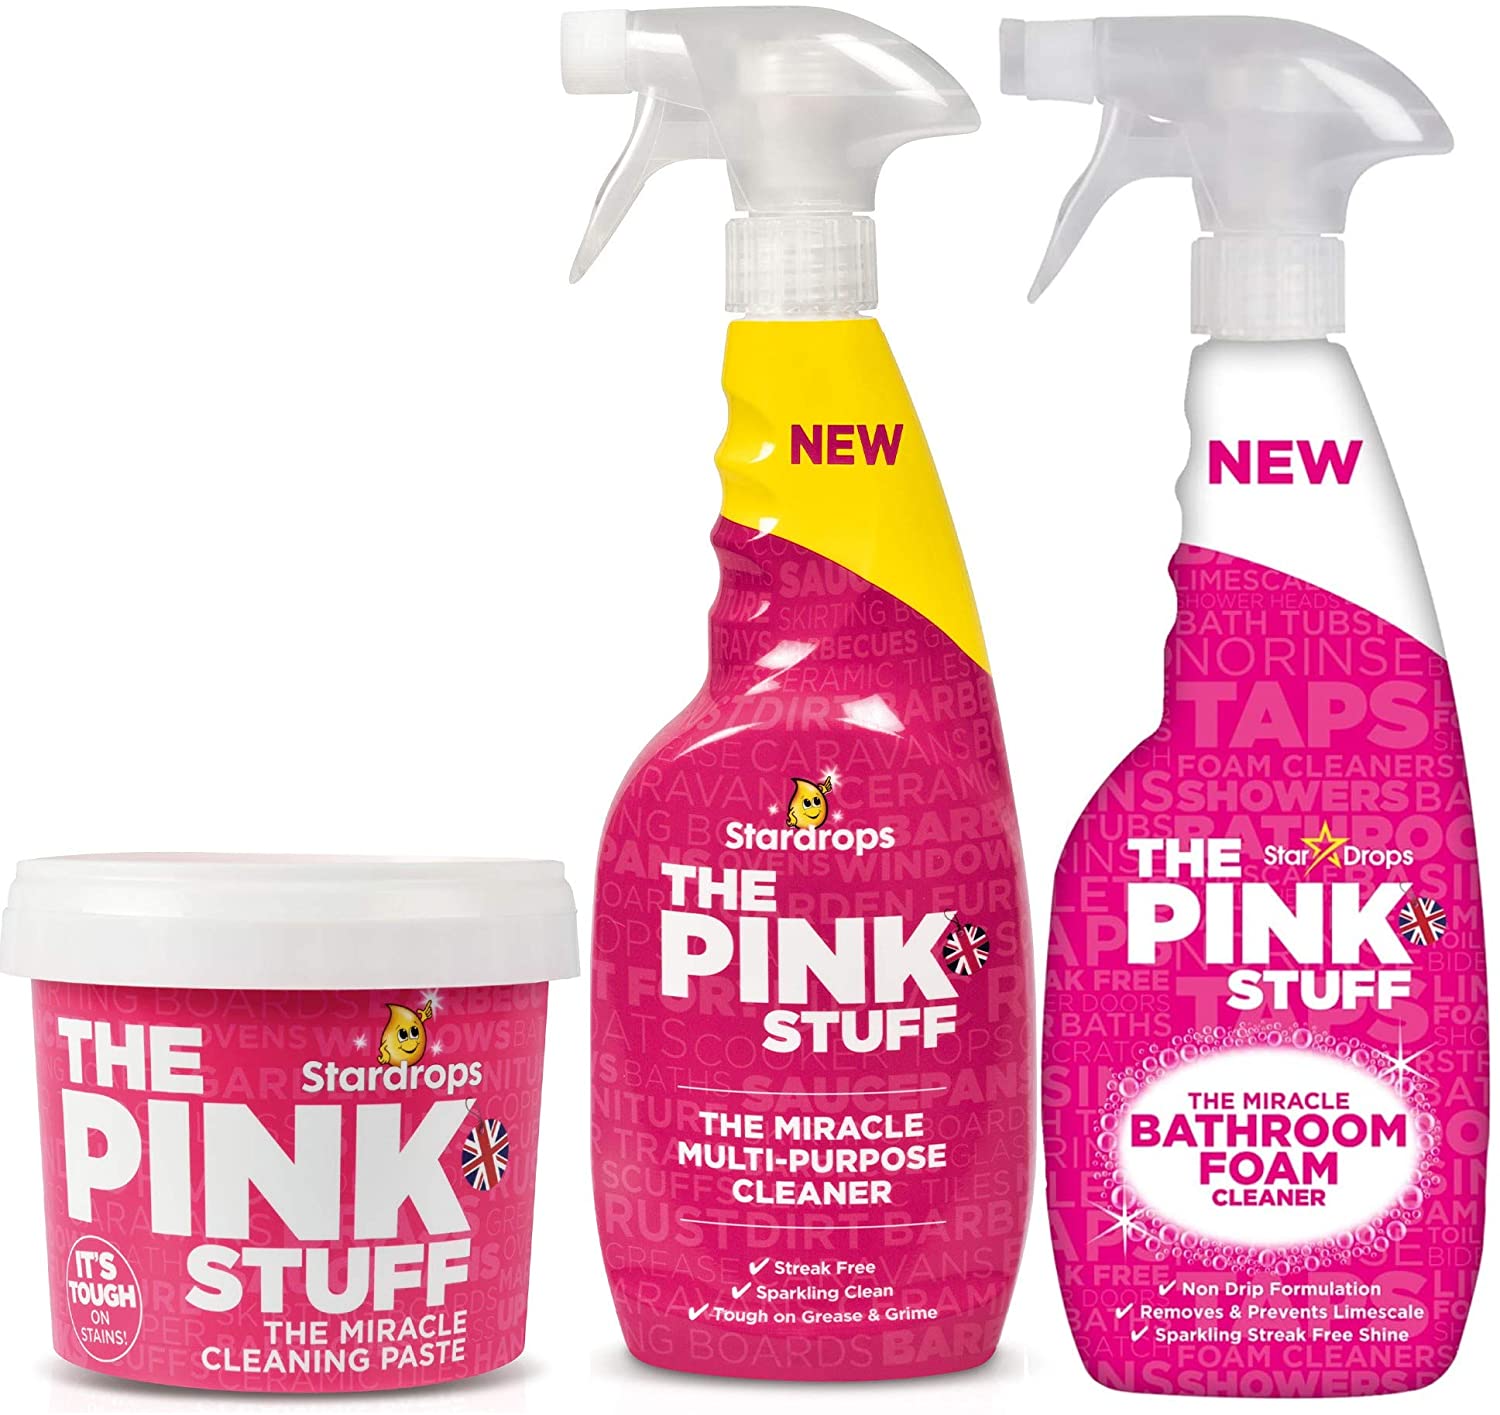 Stardrops - The Pink Stuff - The Miracle Cleaning Paste, Multi-Purpose Spray, And Bathroom Foam 3-Pack Bundle (1 Cleaning Paste, 1 Multi-Purpose Spray, 1 Bathroom Foam) - image 1 of 4